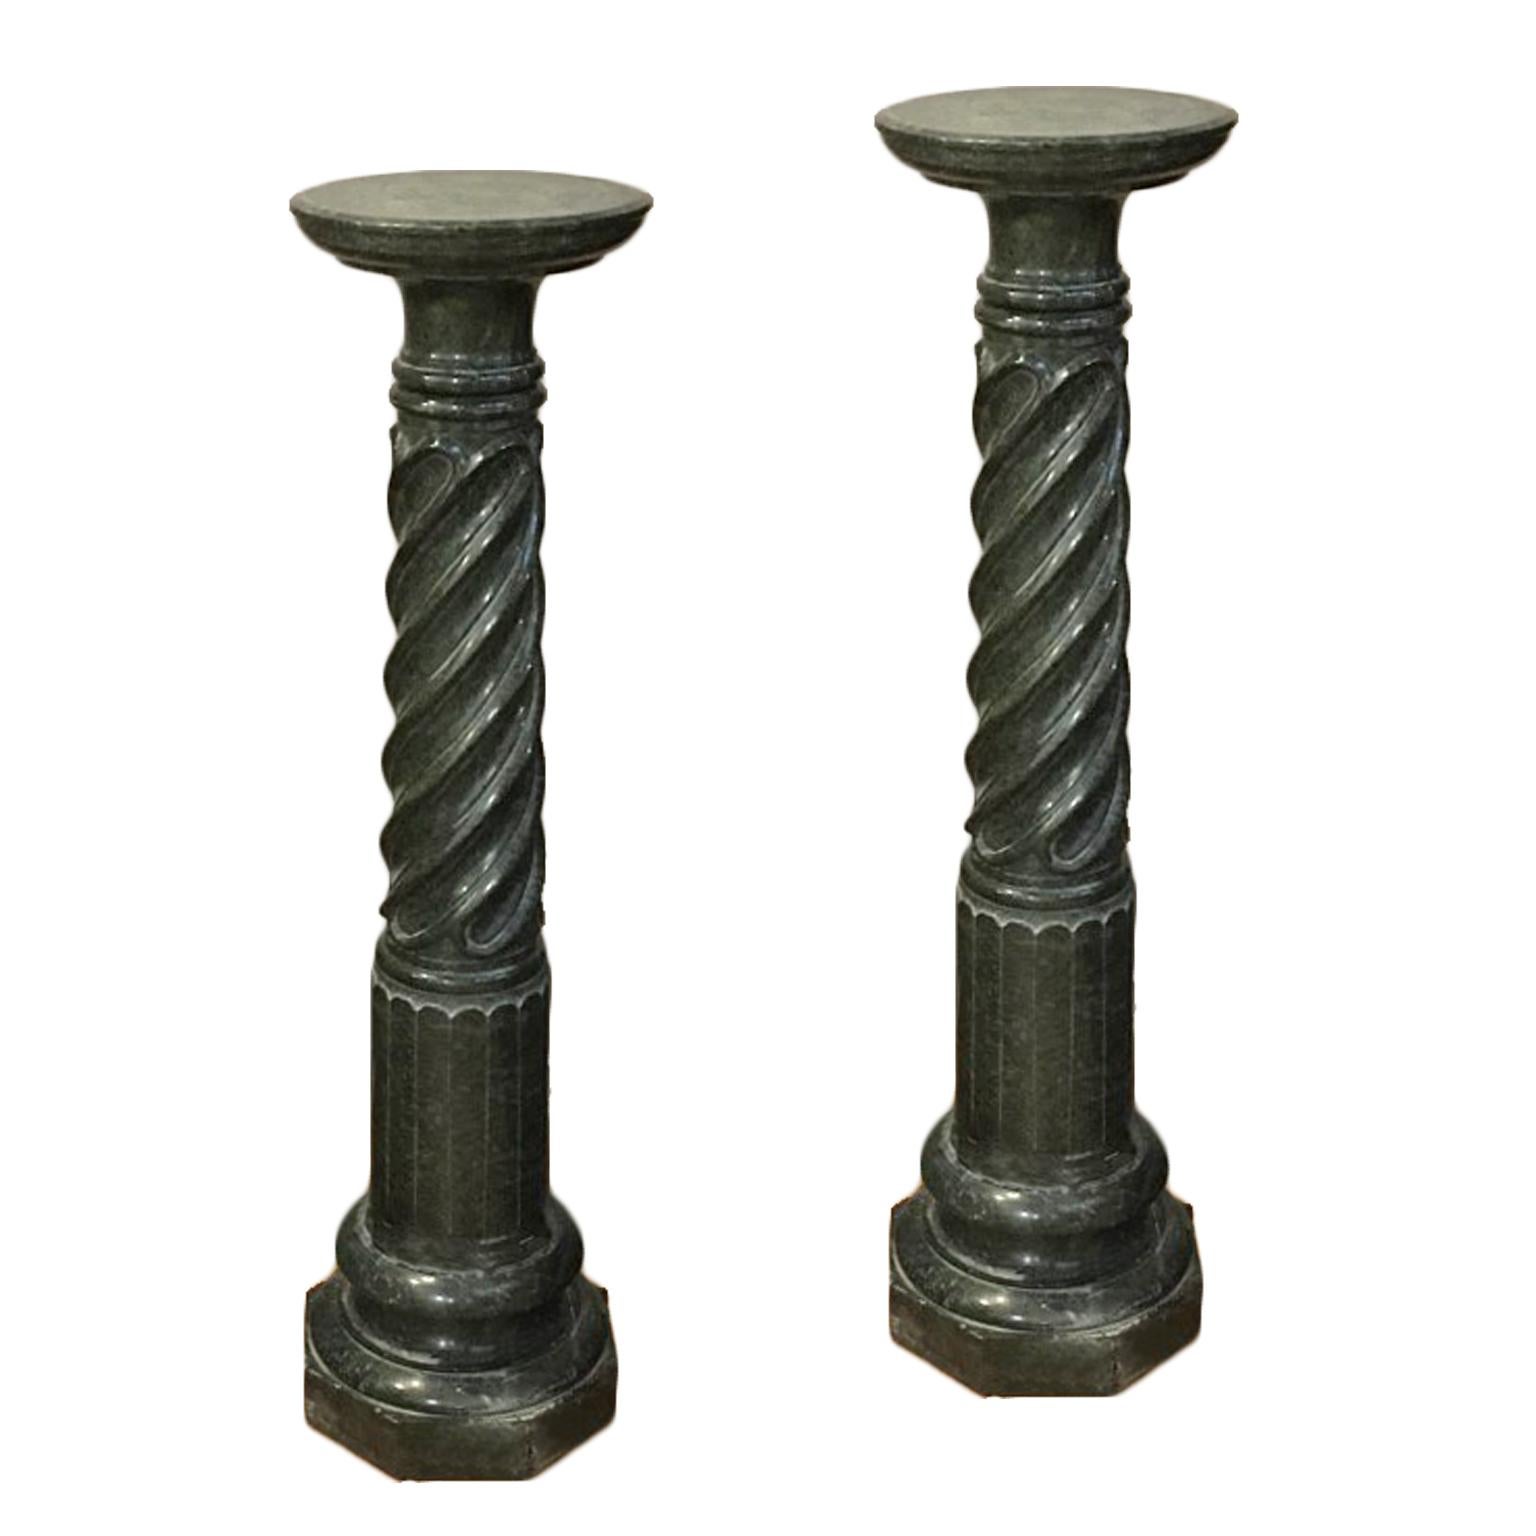 Beautiful pair of columns in green Prato marble, made in the 19th century, which recall the Renaissance style. The columns are characterized by elegant grooves in the lower part, while they are twisted in the upper part. Both decorations give a